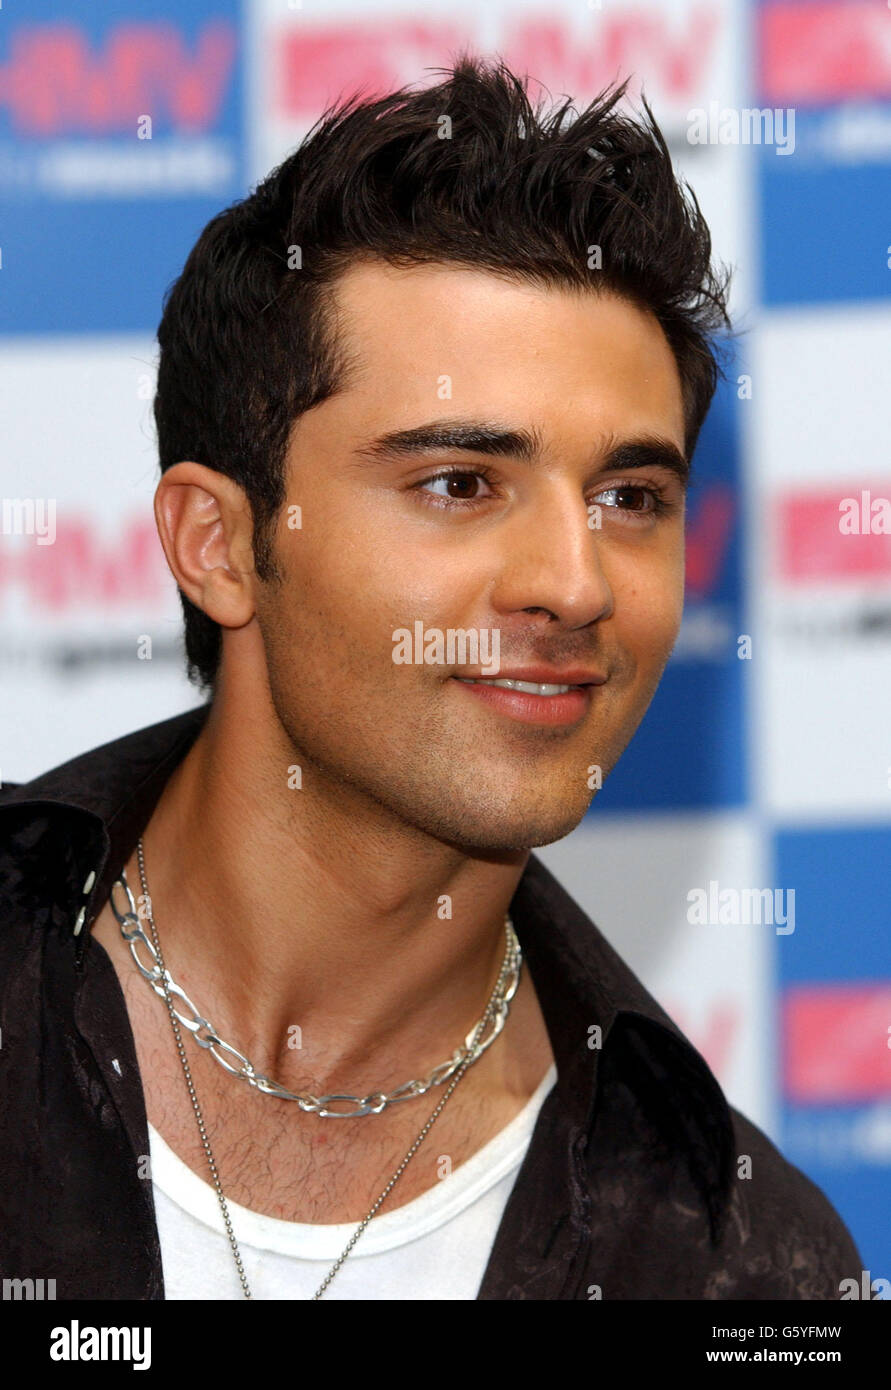 Pop Idol's Darius Danesh during a photocall at the HMV store in London's  Oxford Street, where he signed copies of his debut single 'Colourblind'  Stock Photo - Alamy